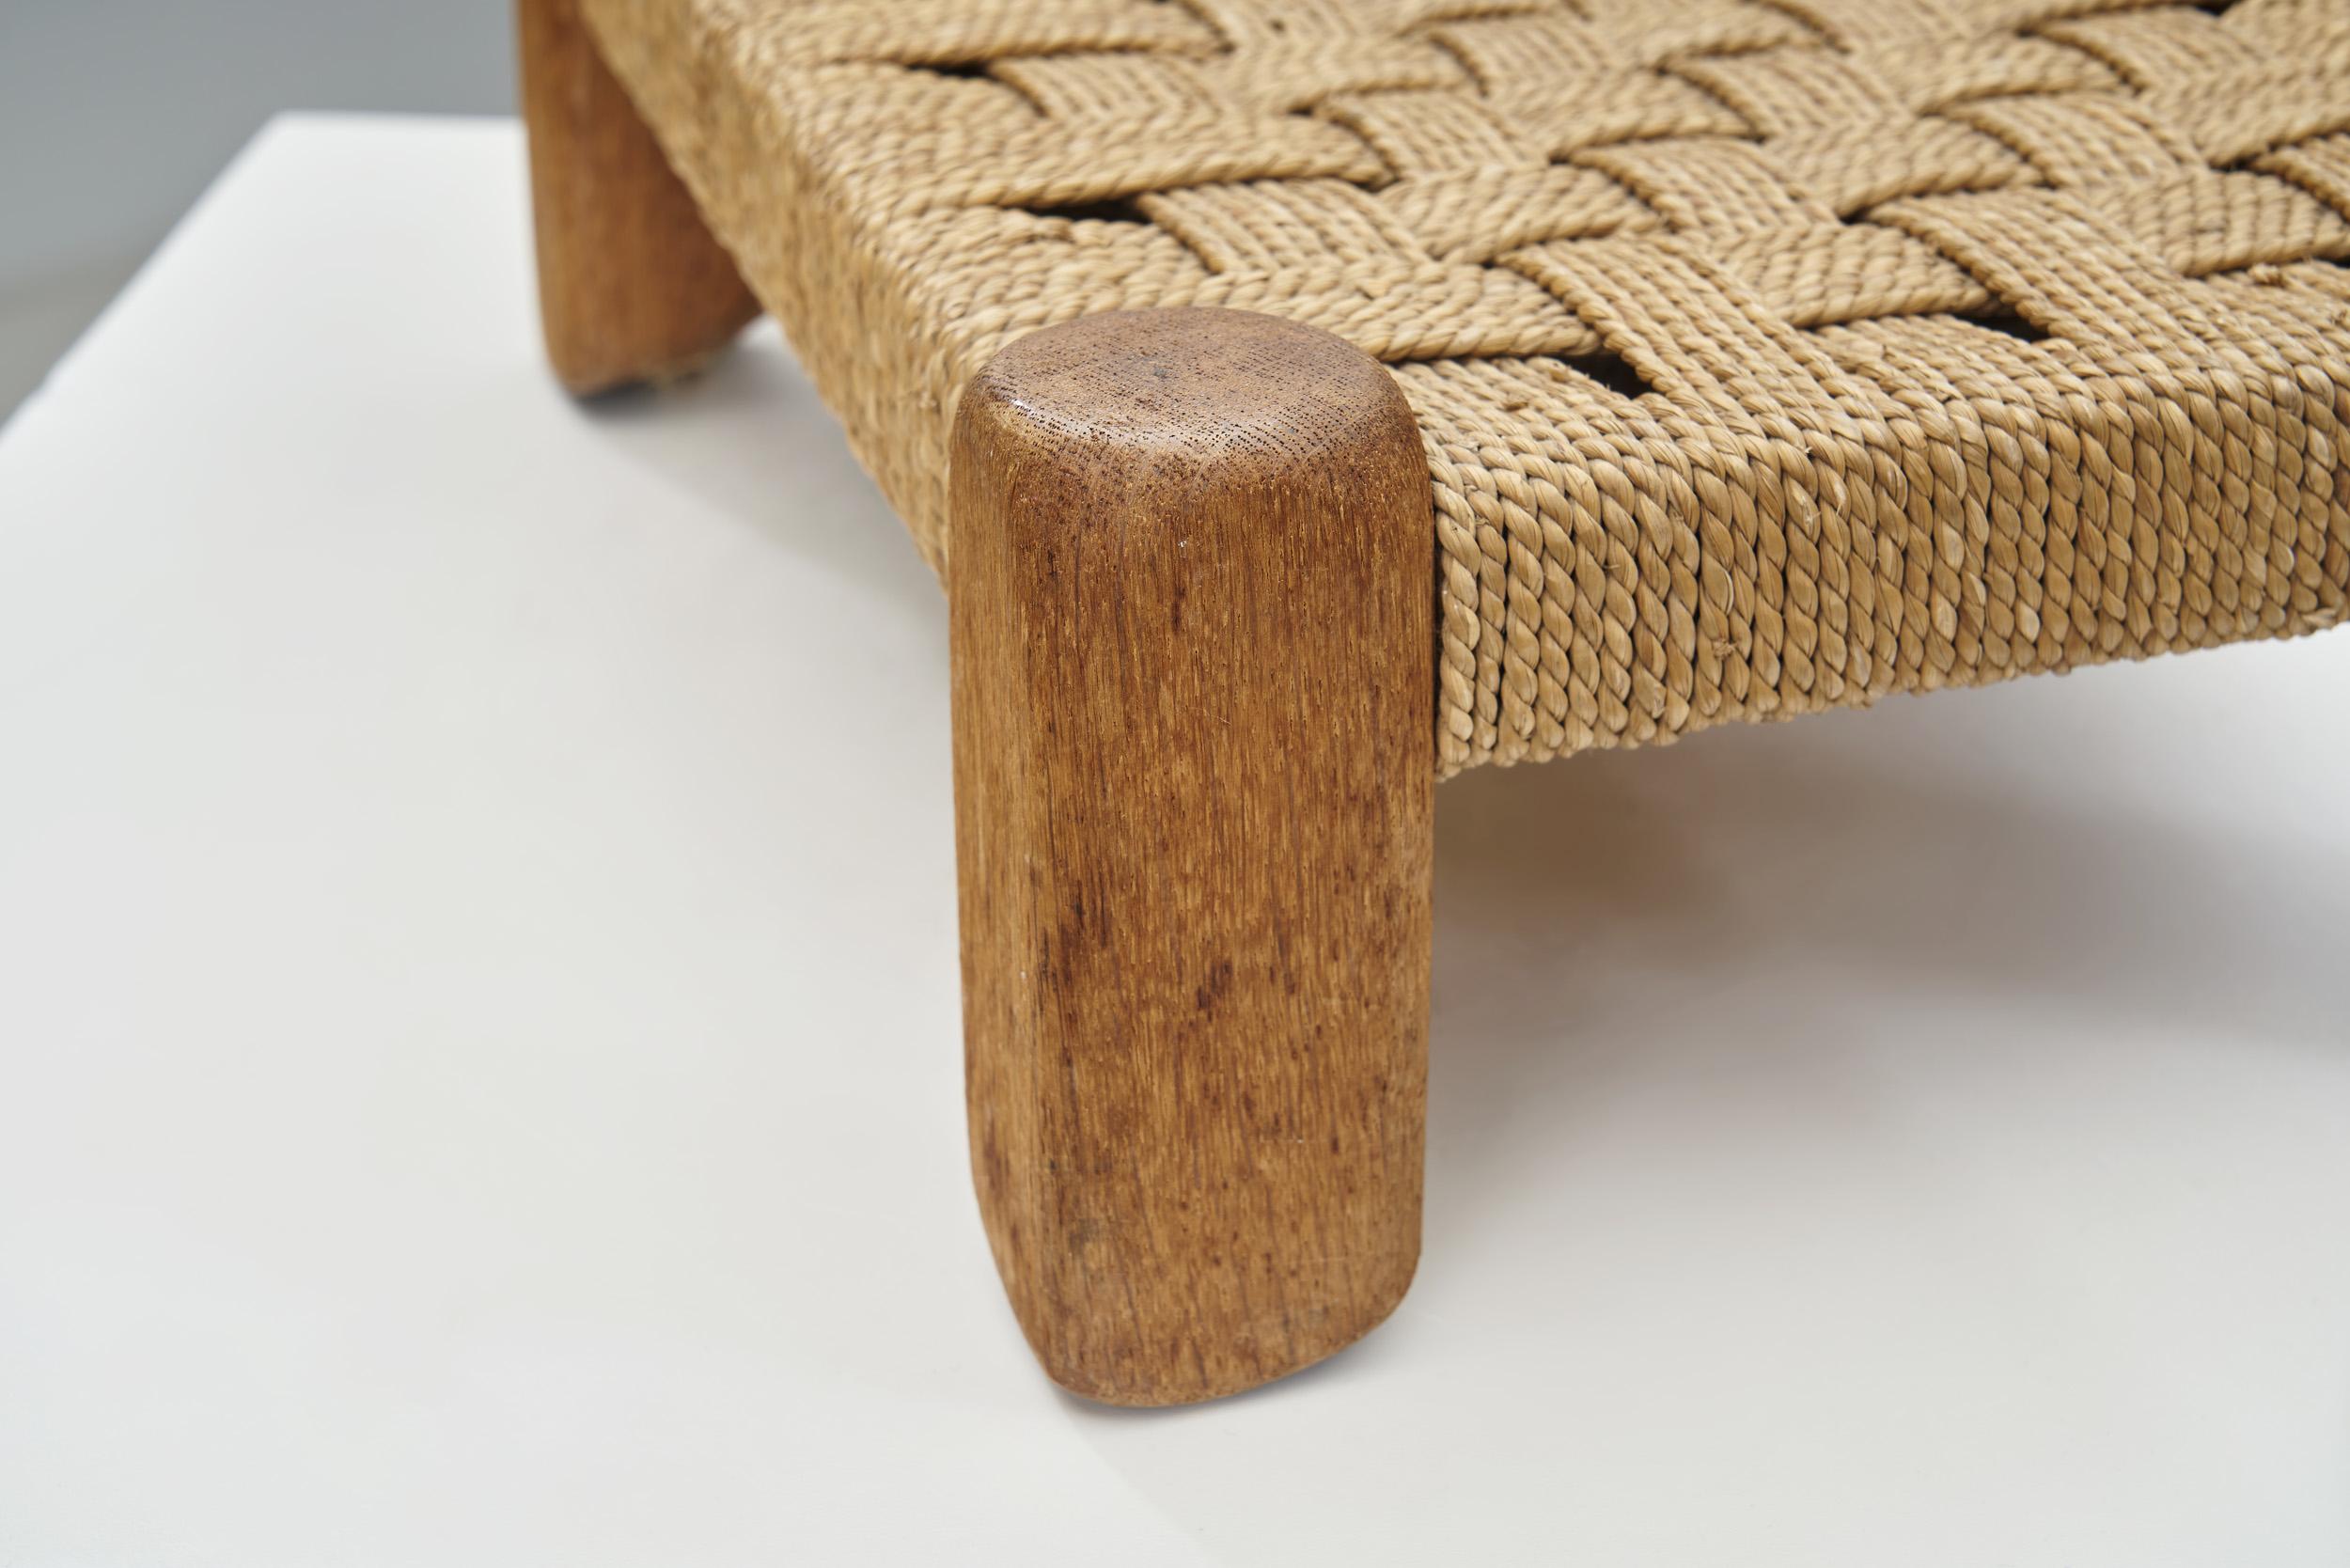 Woven Rush and Wood Stool, Europe ca 1950s For Sale 6